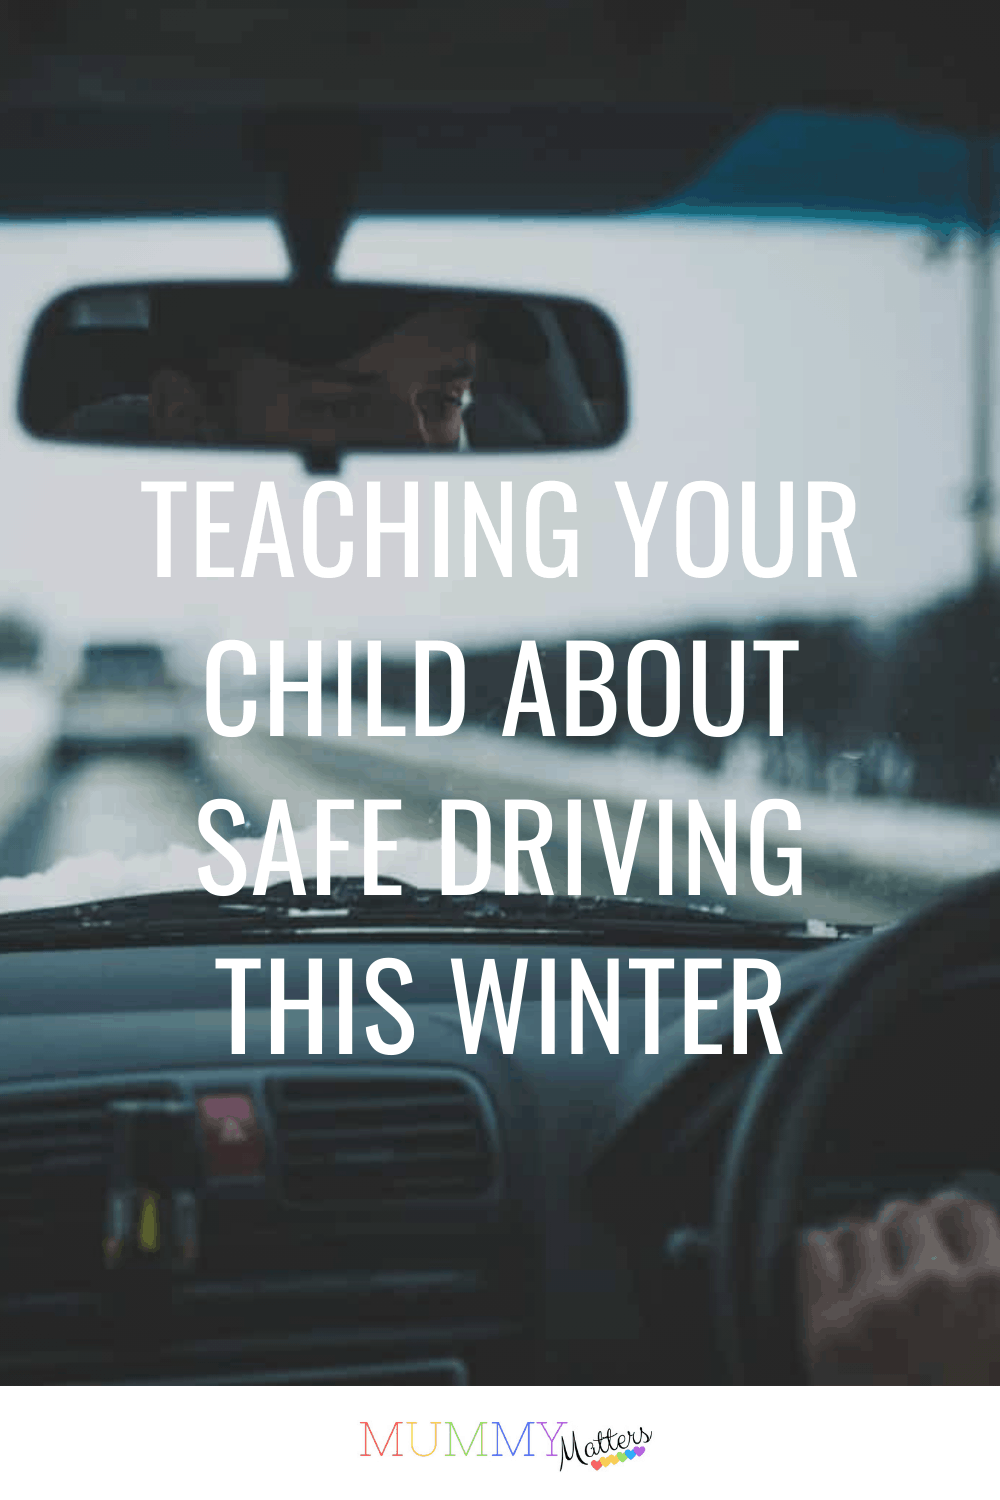 As winter approaches, we need to think about safe driving as winter road conditions cause multiple accidents each year, and to prepare our young drivers.